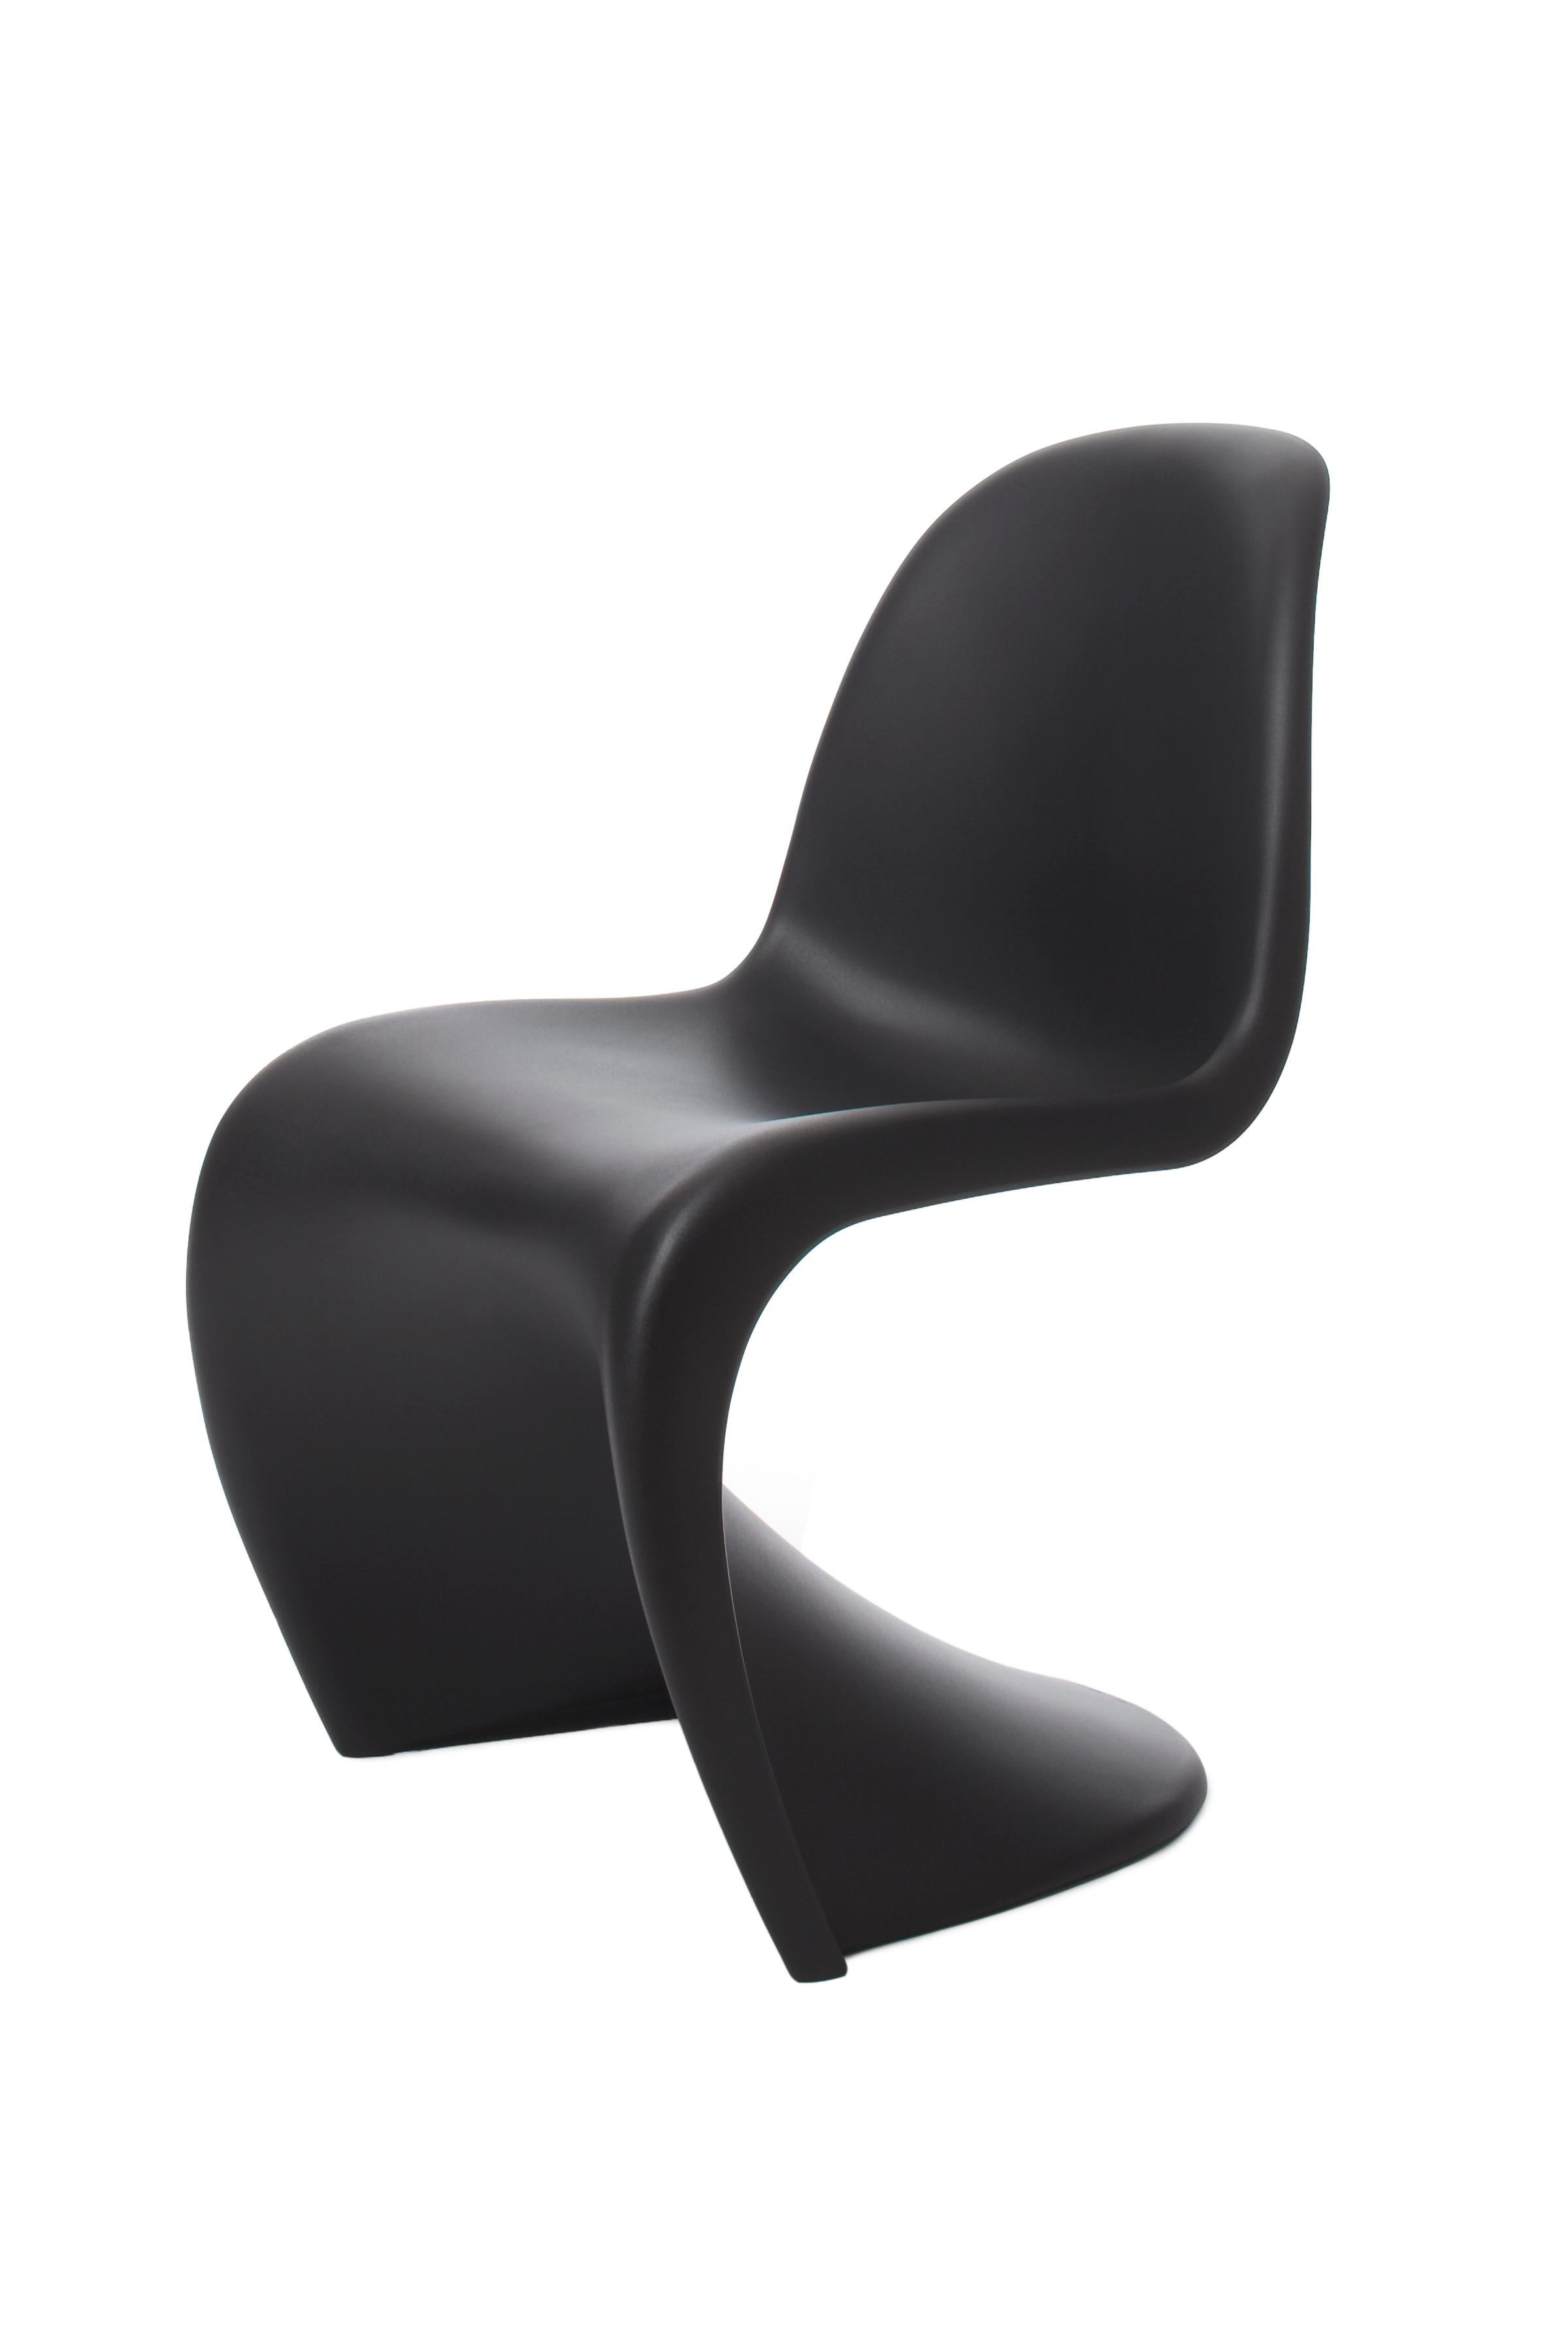 These items are currently only available in the United States.

Conceived by Verner Panton in 1960, the Panton chair was developed for serial production in collaboration with Vitra (1967). Today, the all-plastic chair is an icon of 20th century